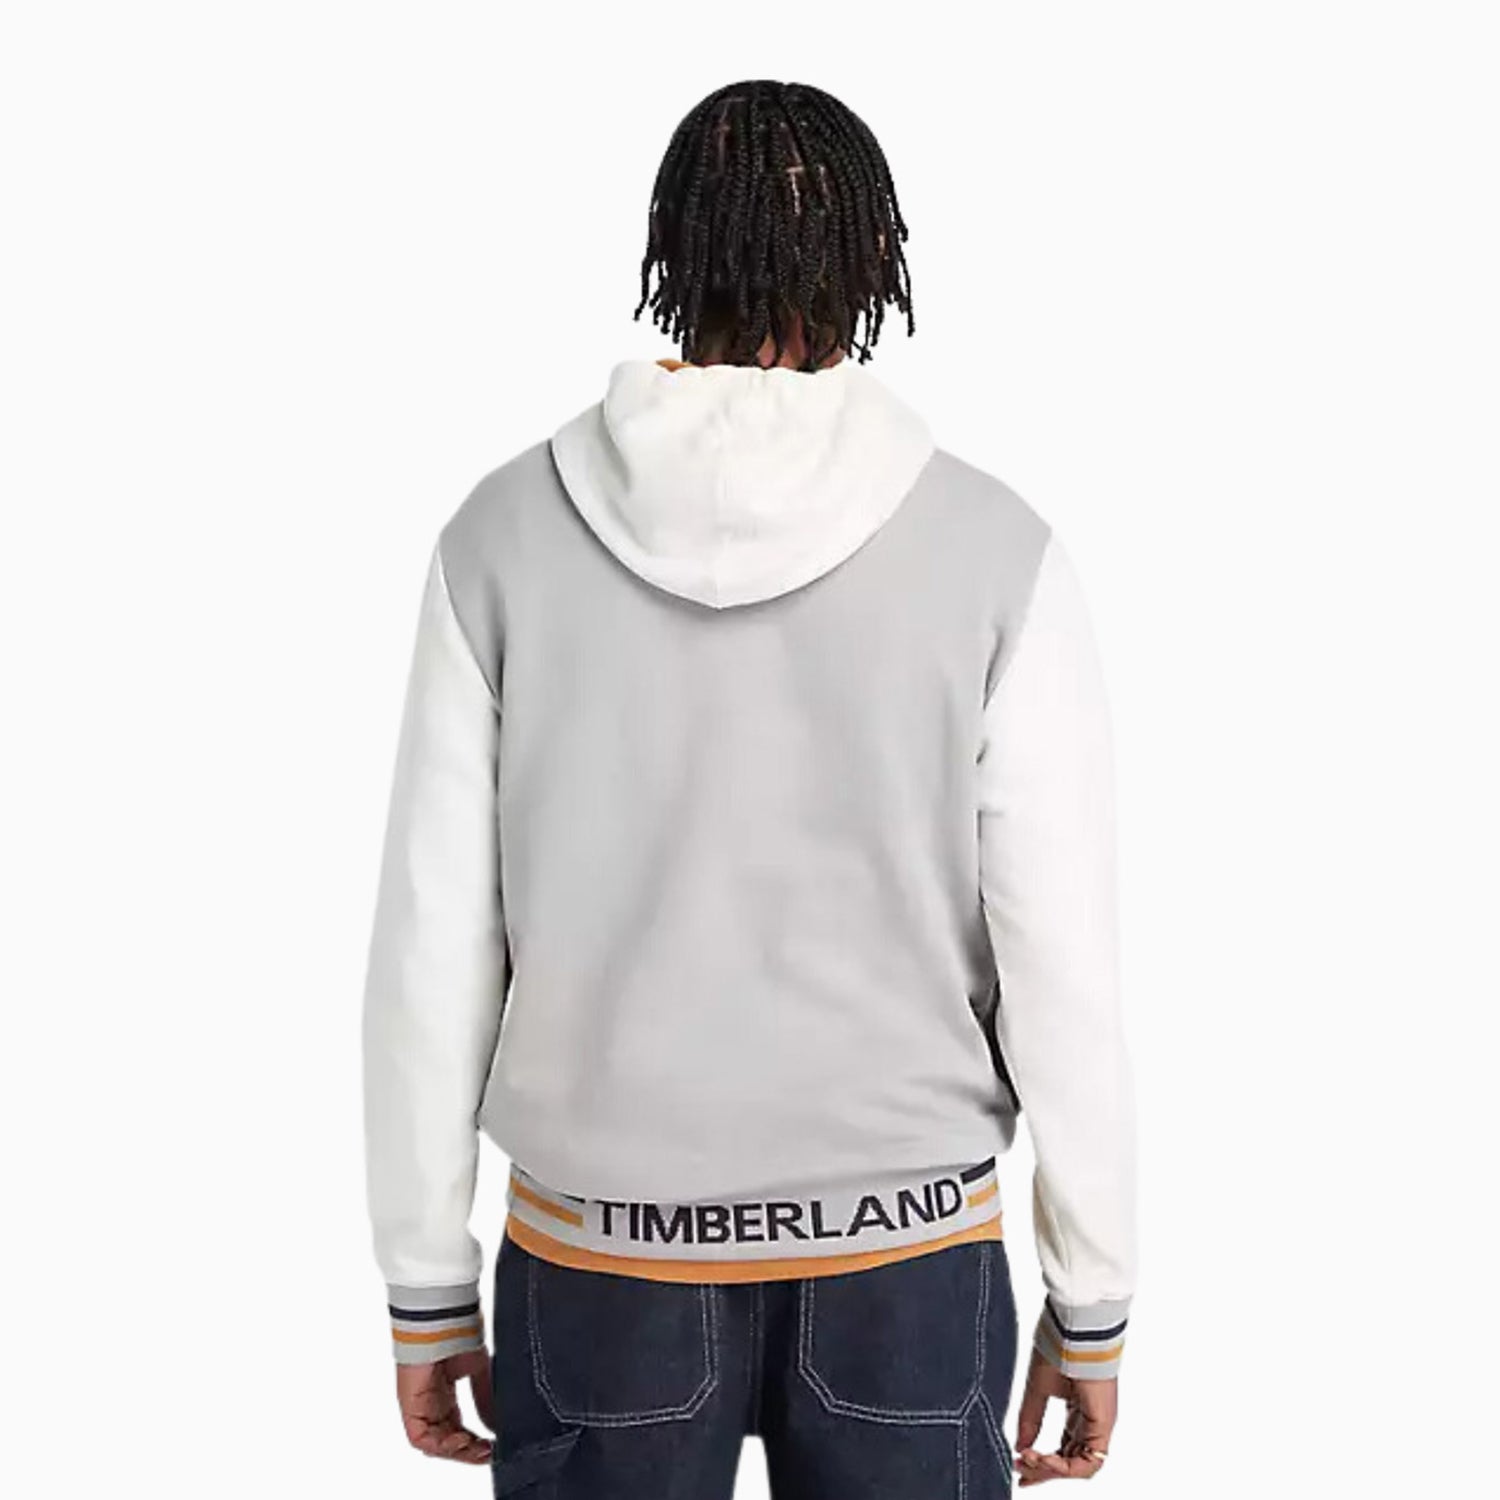 timberland-mens-back-to-school-sports-graphic-outfit-tb0a6765dp6-tb0a676s085